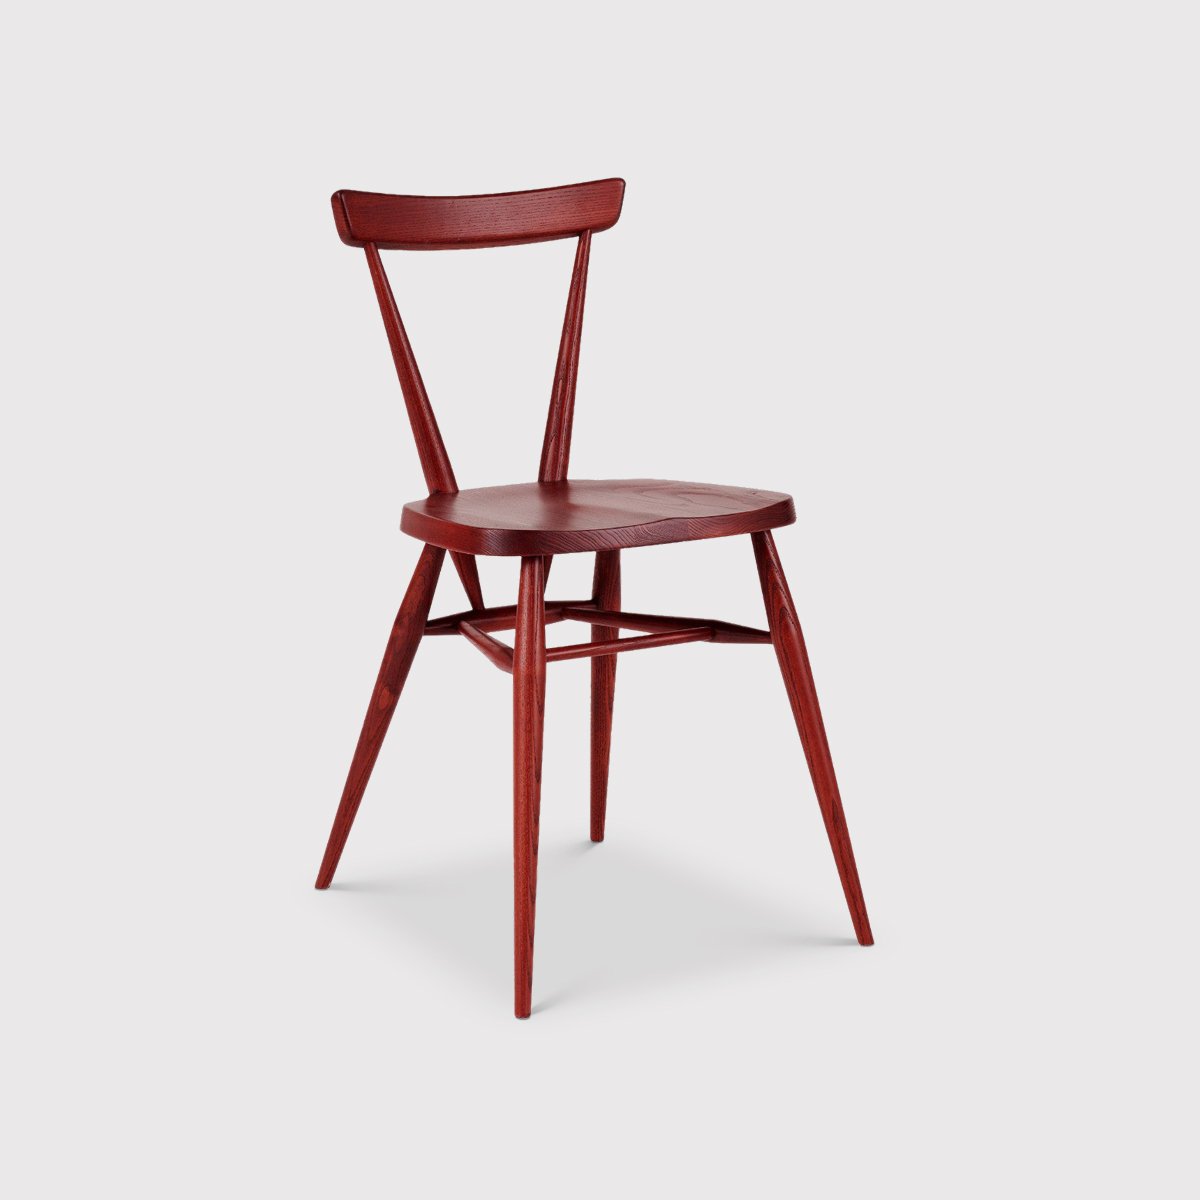 L.Ercolani Stacking Dining Chair, Red | Barker & Stonehouse